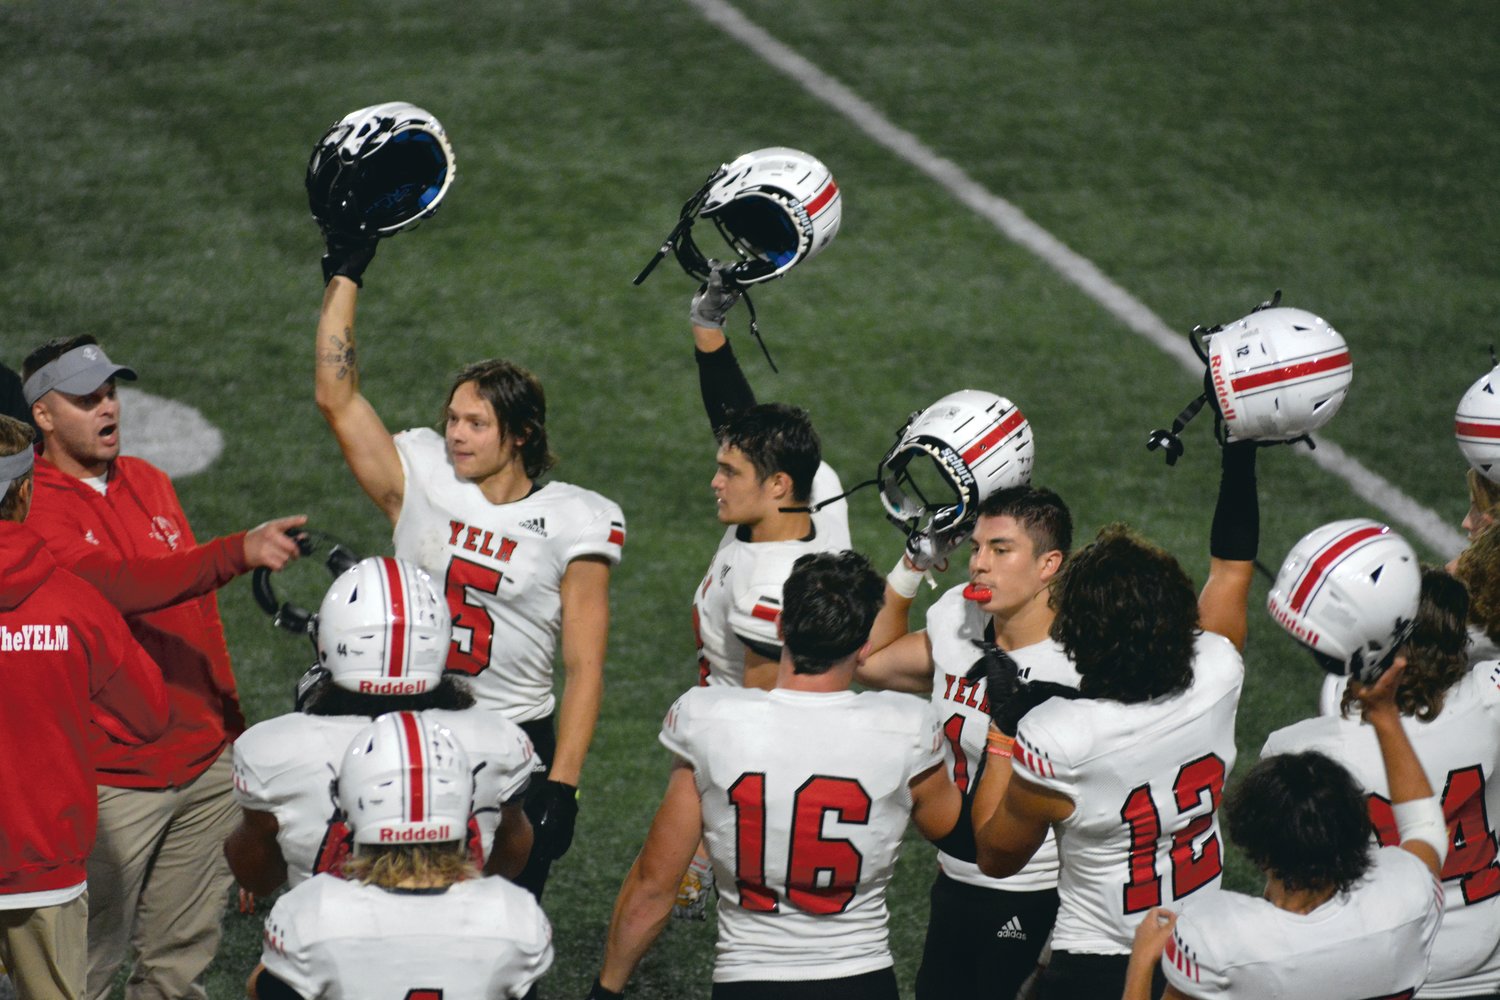 The Tornados lift their helmets at the start of the fourth quarter during their game against River Ridge on Friday, Sept. 23.